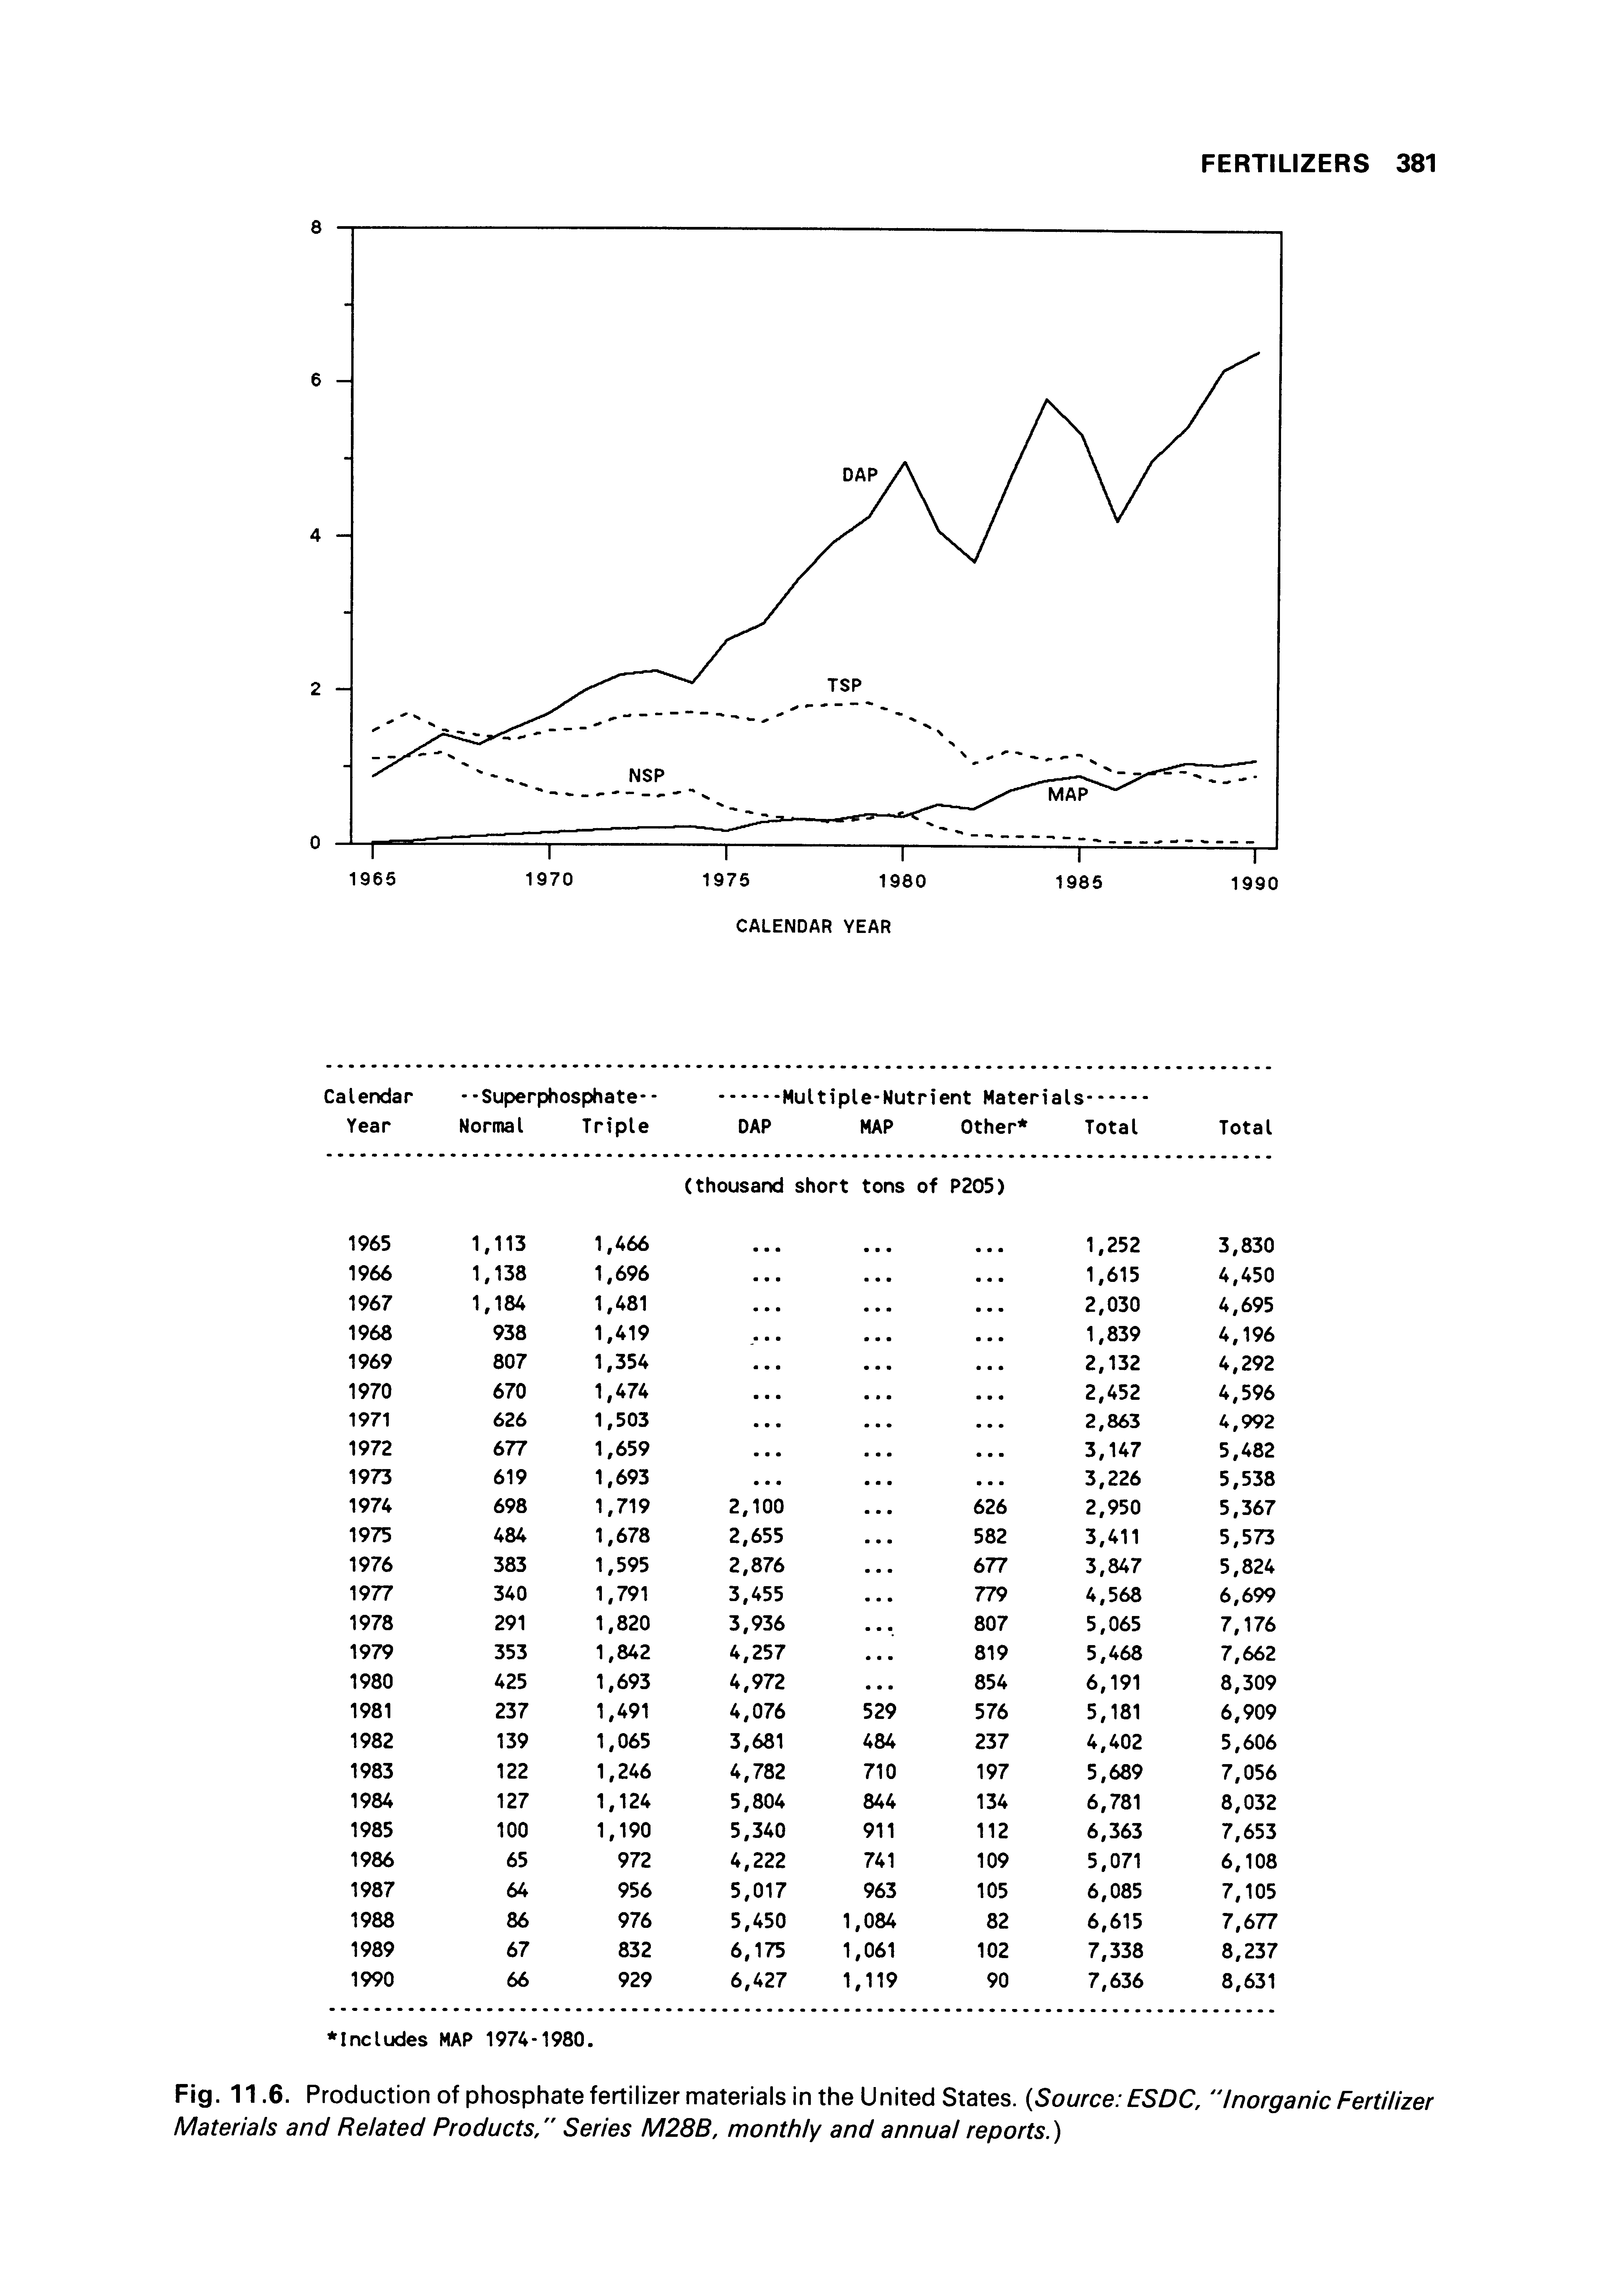 Fig. 11.6. Production of phosphate fertilizer materials in the United States. (Source ESDC, "Inorganic Fertilizer Materials and Related Products," Series M28B, monthly and annual reports.)...